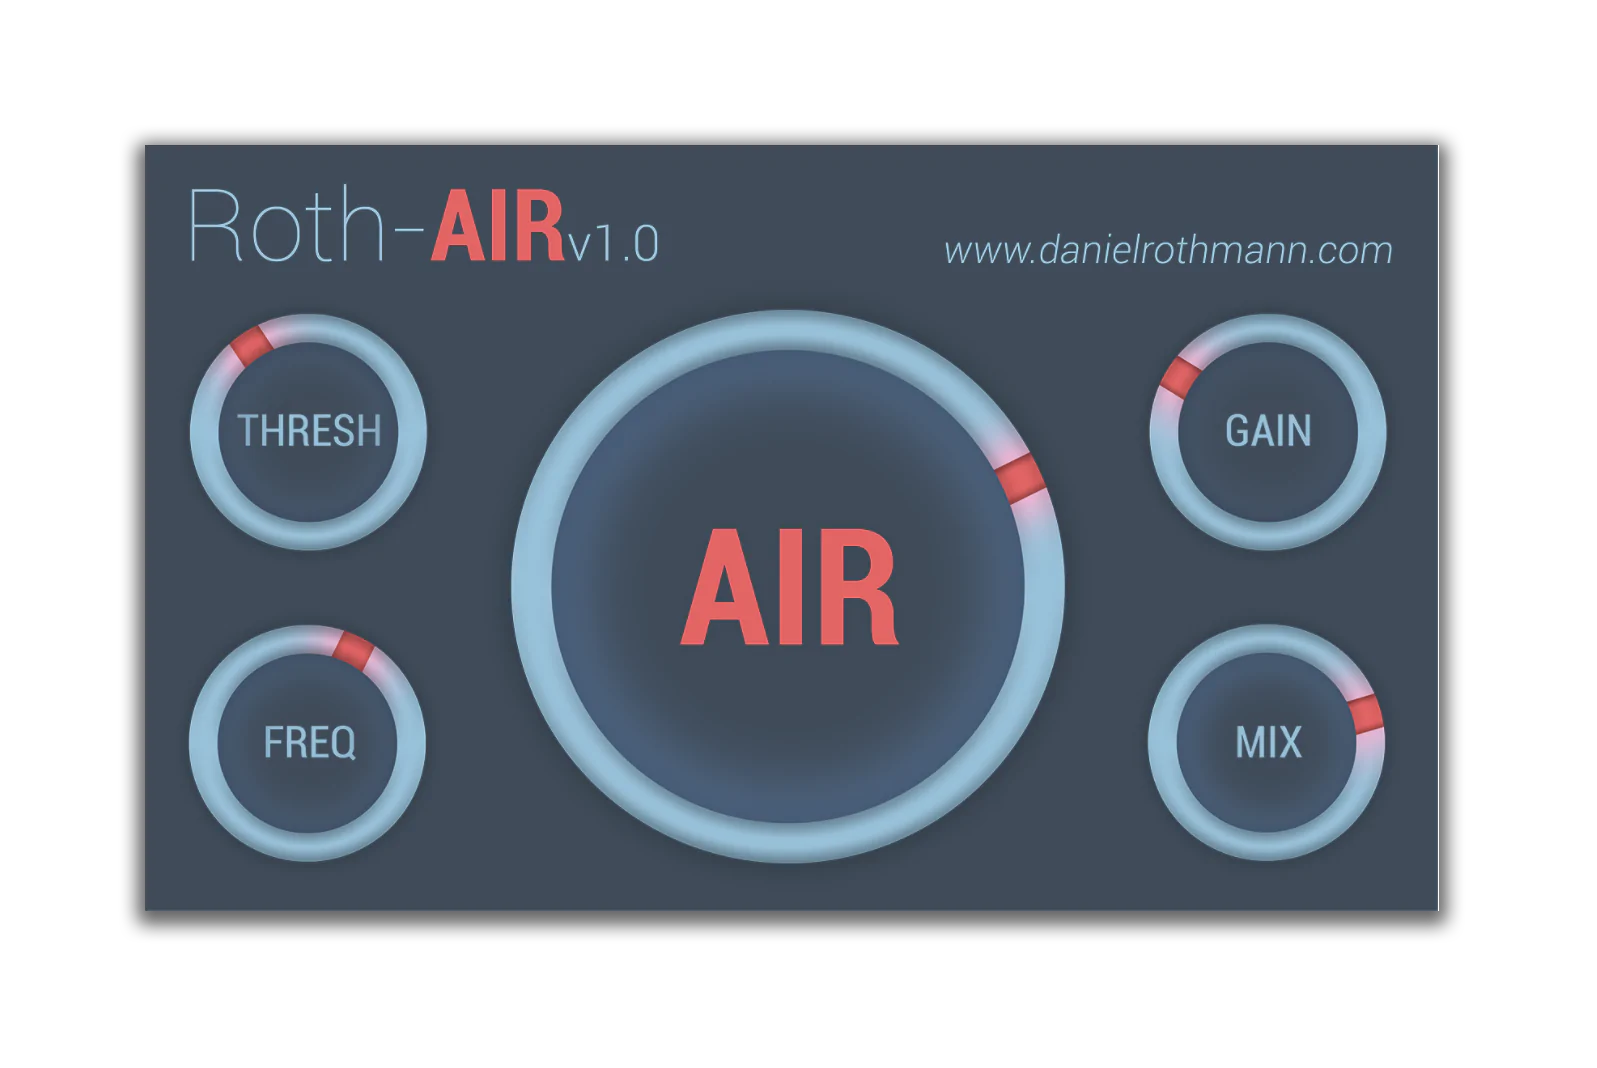 Displayed is an audio plugin interface named Roth-Air v1.0, showcasing five circular controls labeled "THRESH," "GAIN," "FREQ," "MIX," and a central control labeled "AIR." The website "www.danielrothmann.com" is positioned at the top right. The design incorporates a dark blue and red color theme.